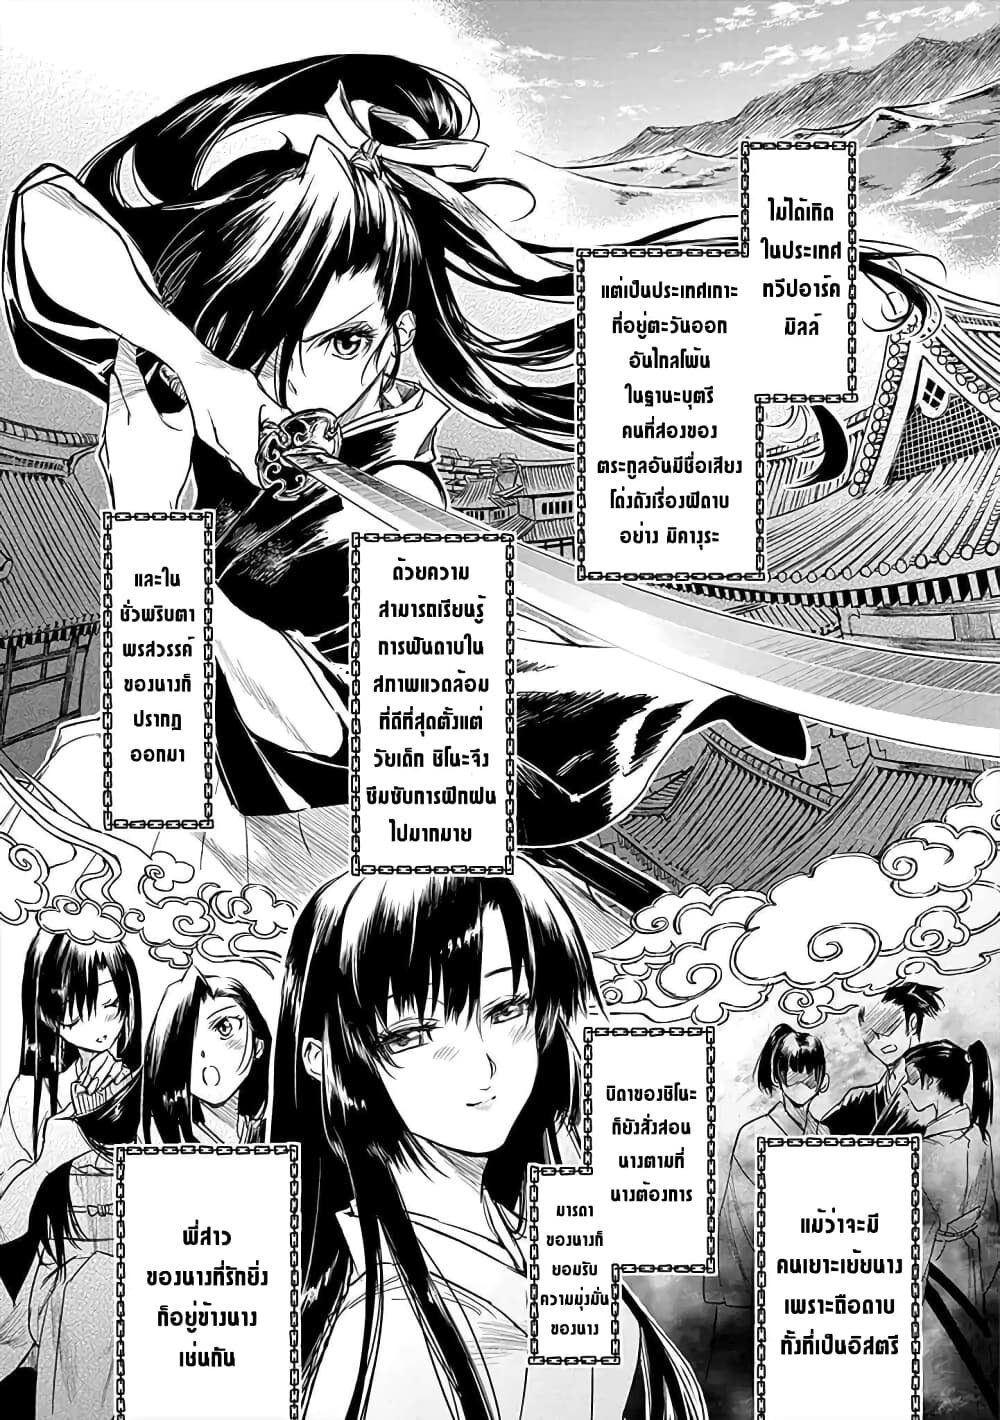 Ori of the Dragon Chain Heart in the Mind 9 (23)